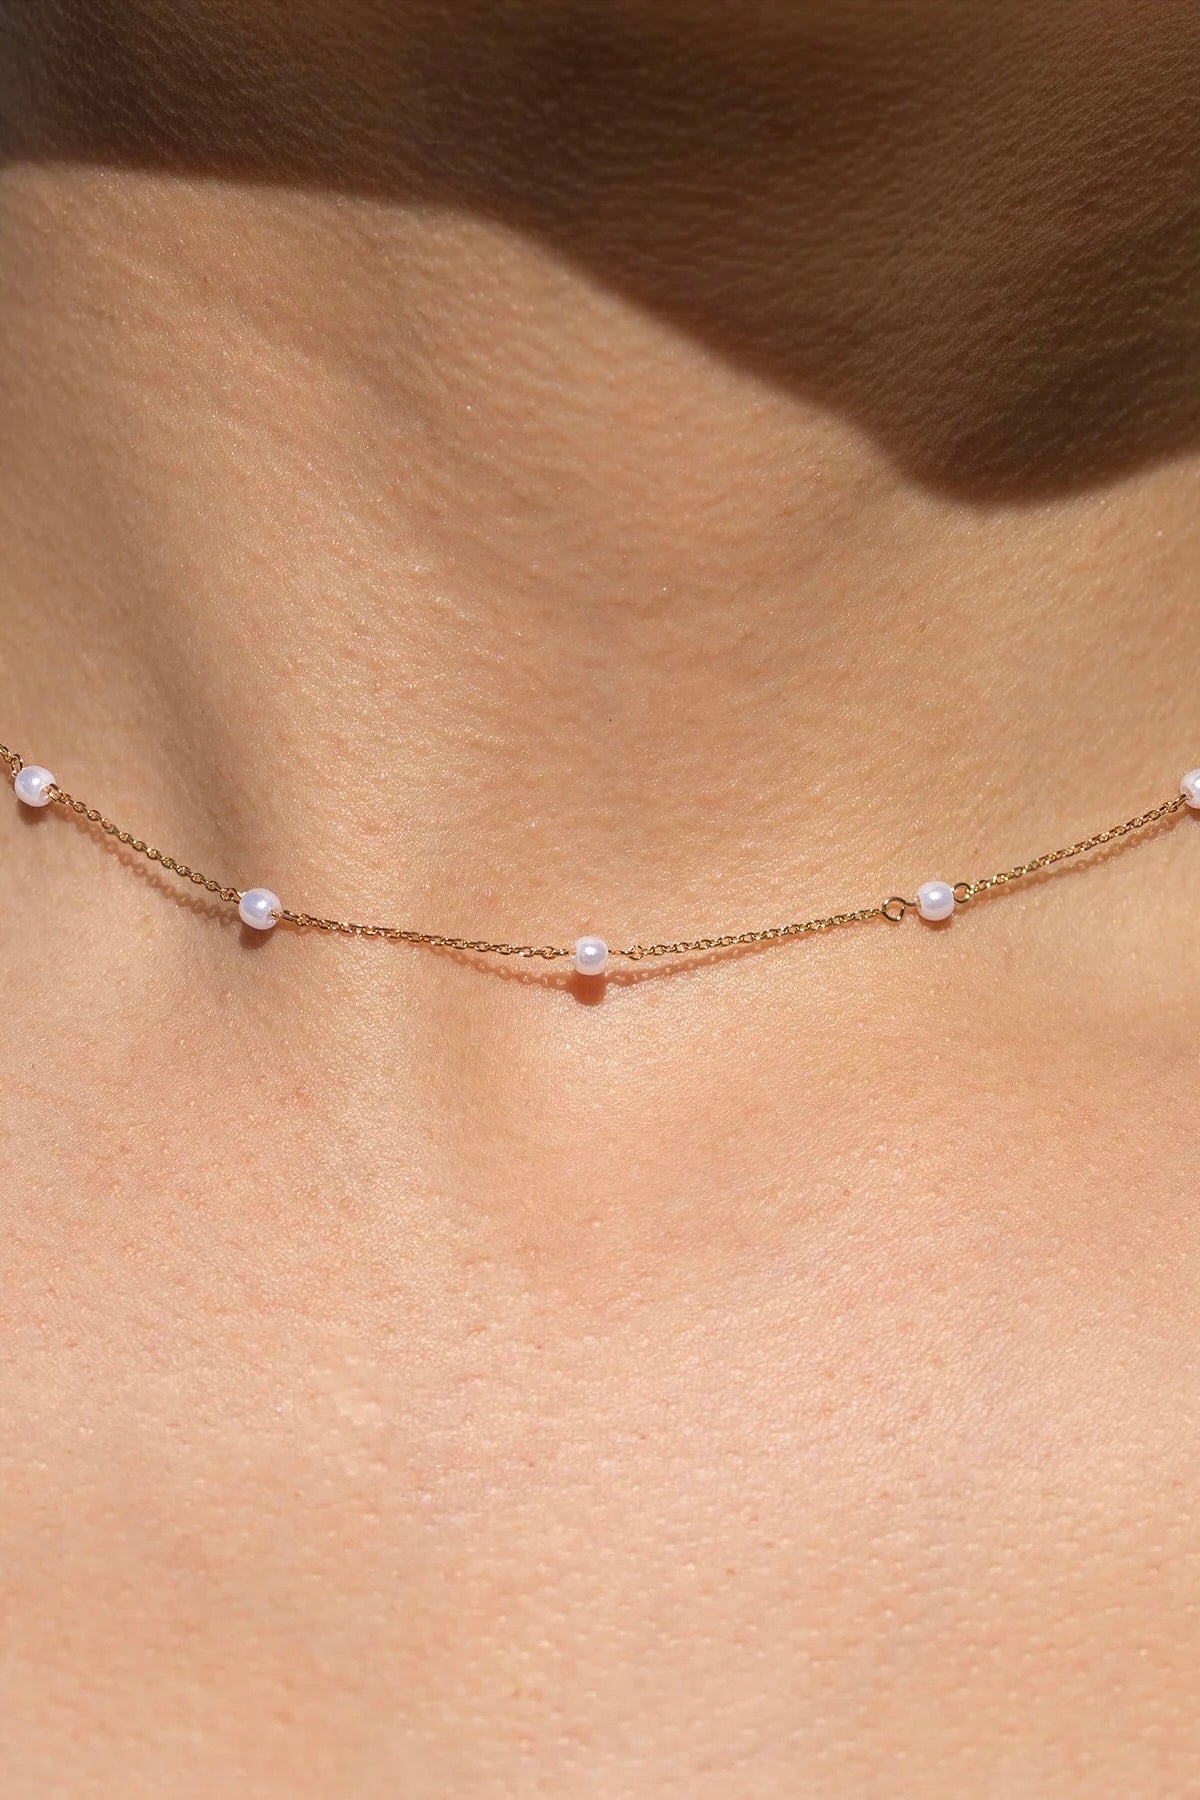 Girls Crew Delicate Pearl Necklace